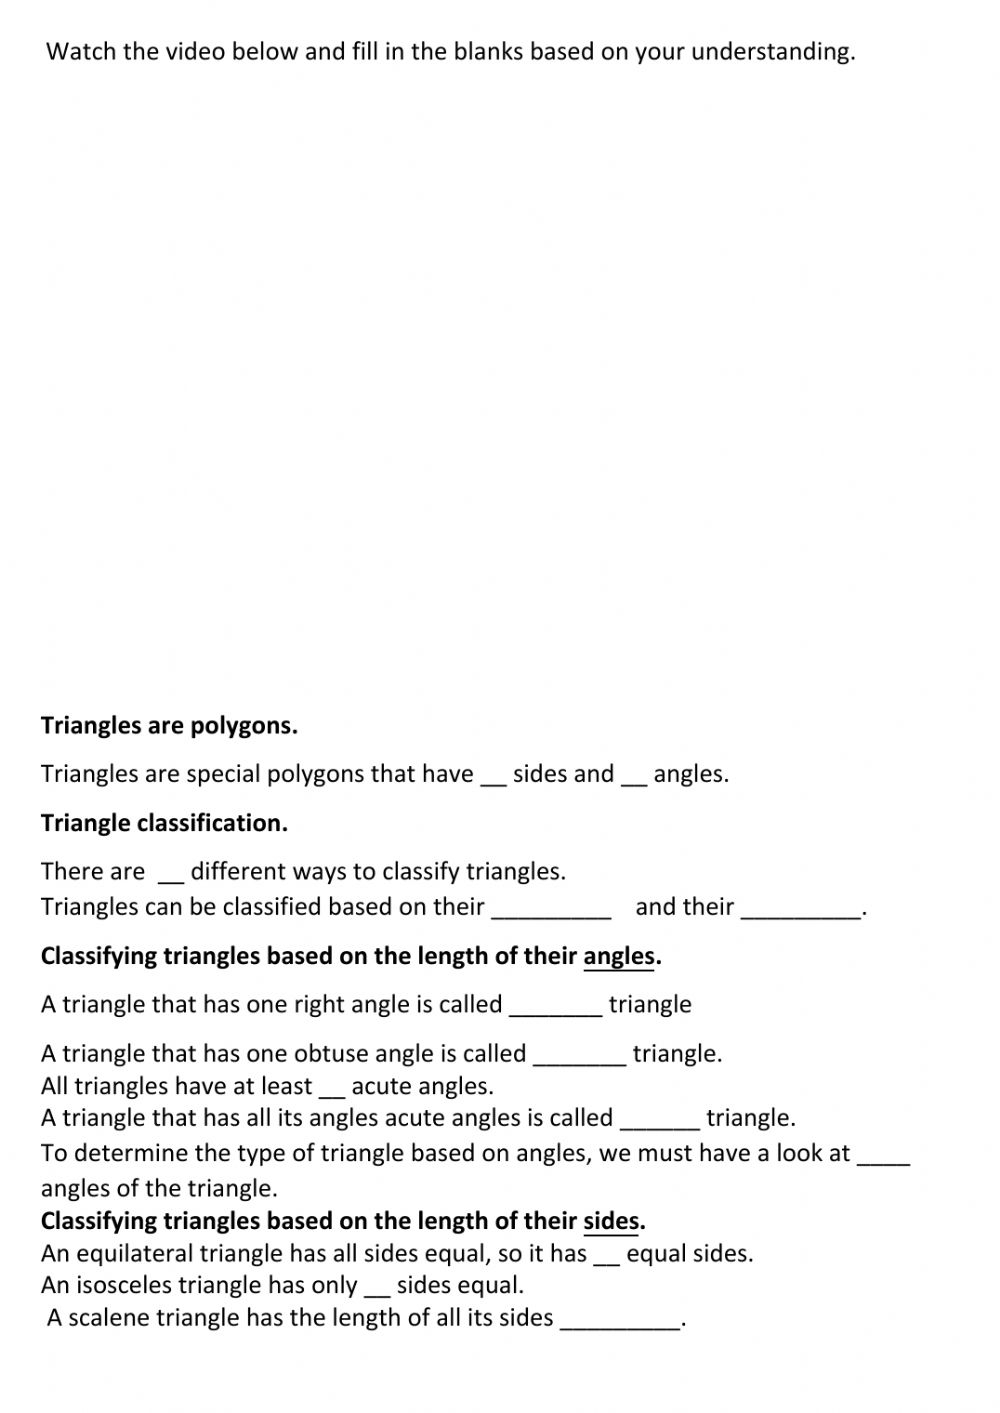 classifying-triangles-interactive-worksheet-math-worksheet-answers